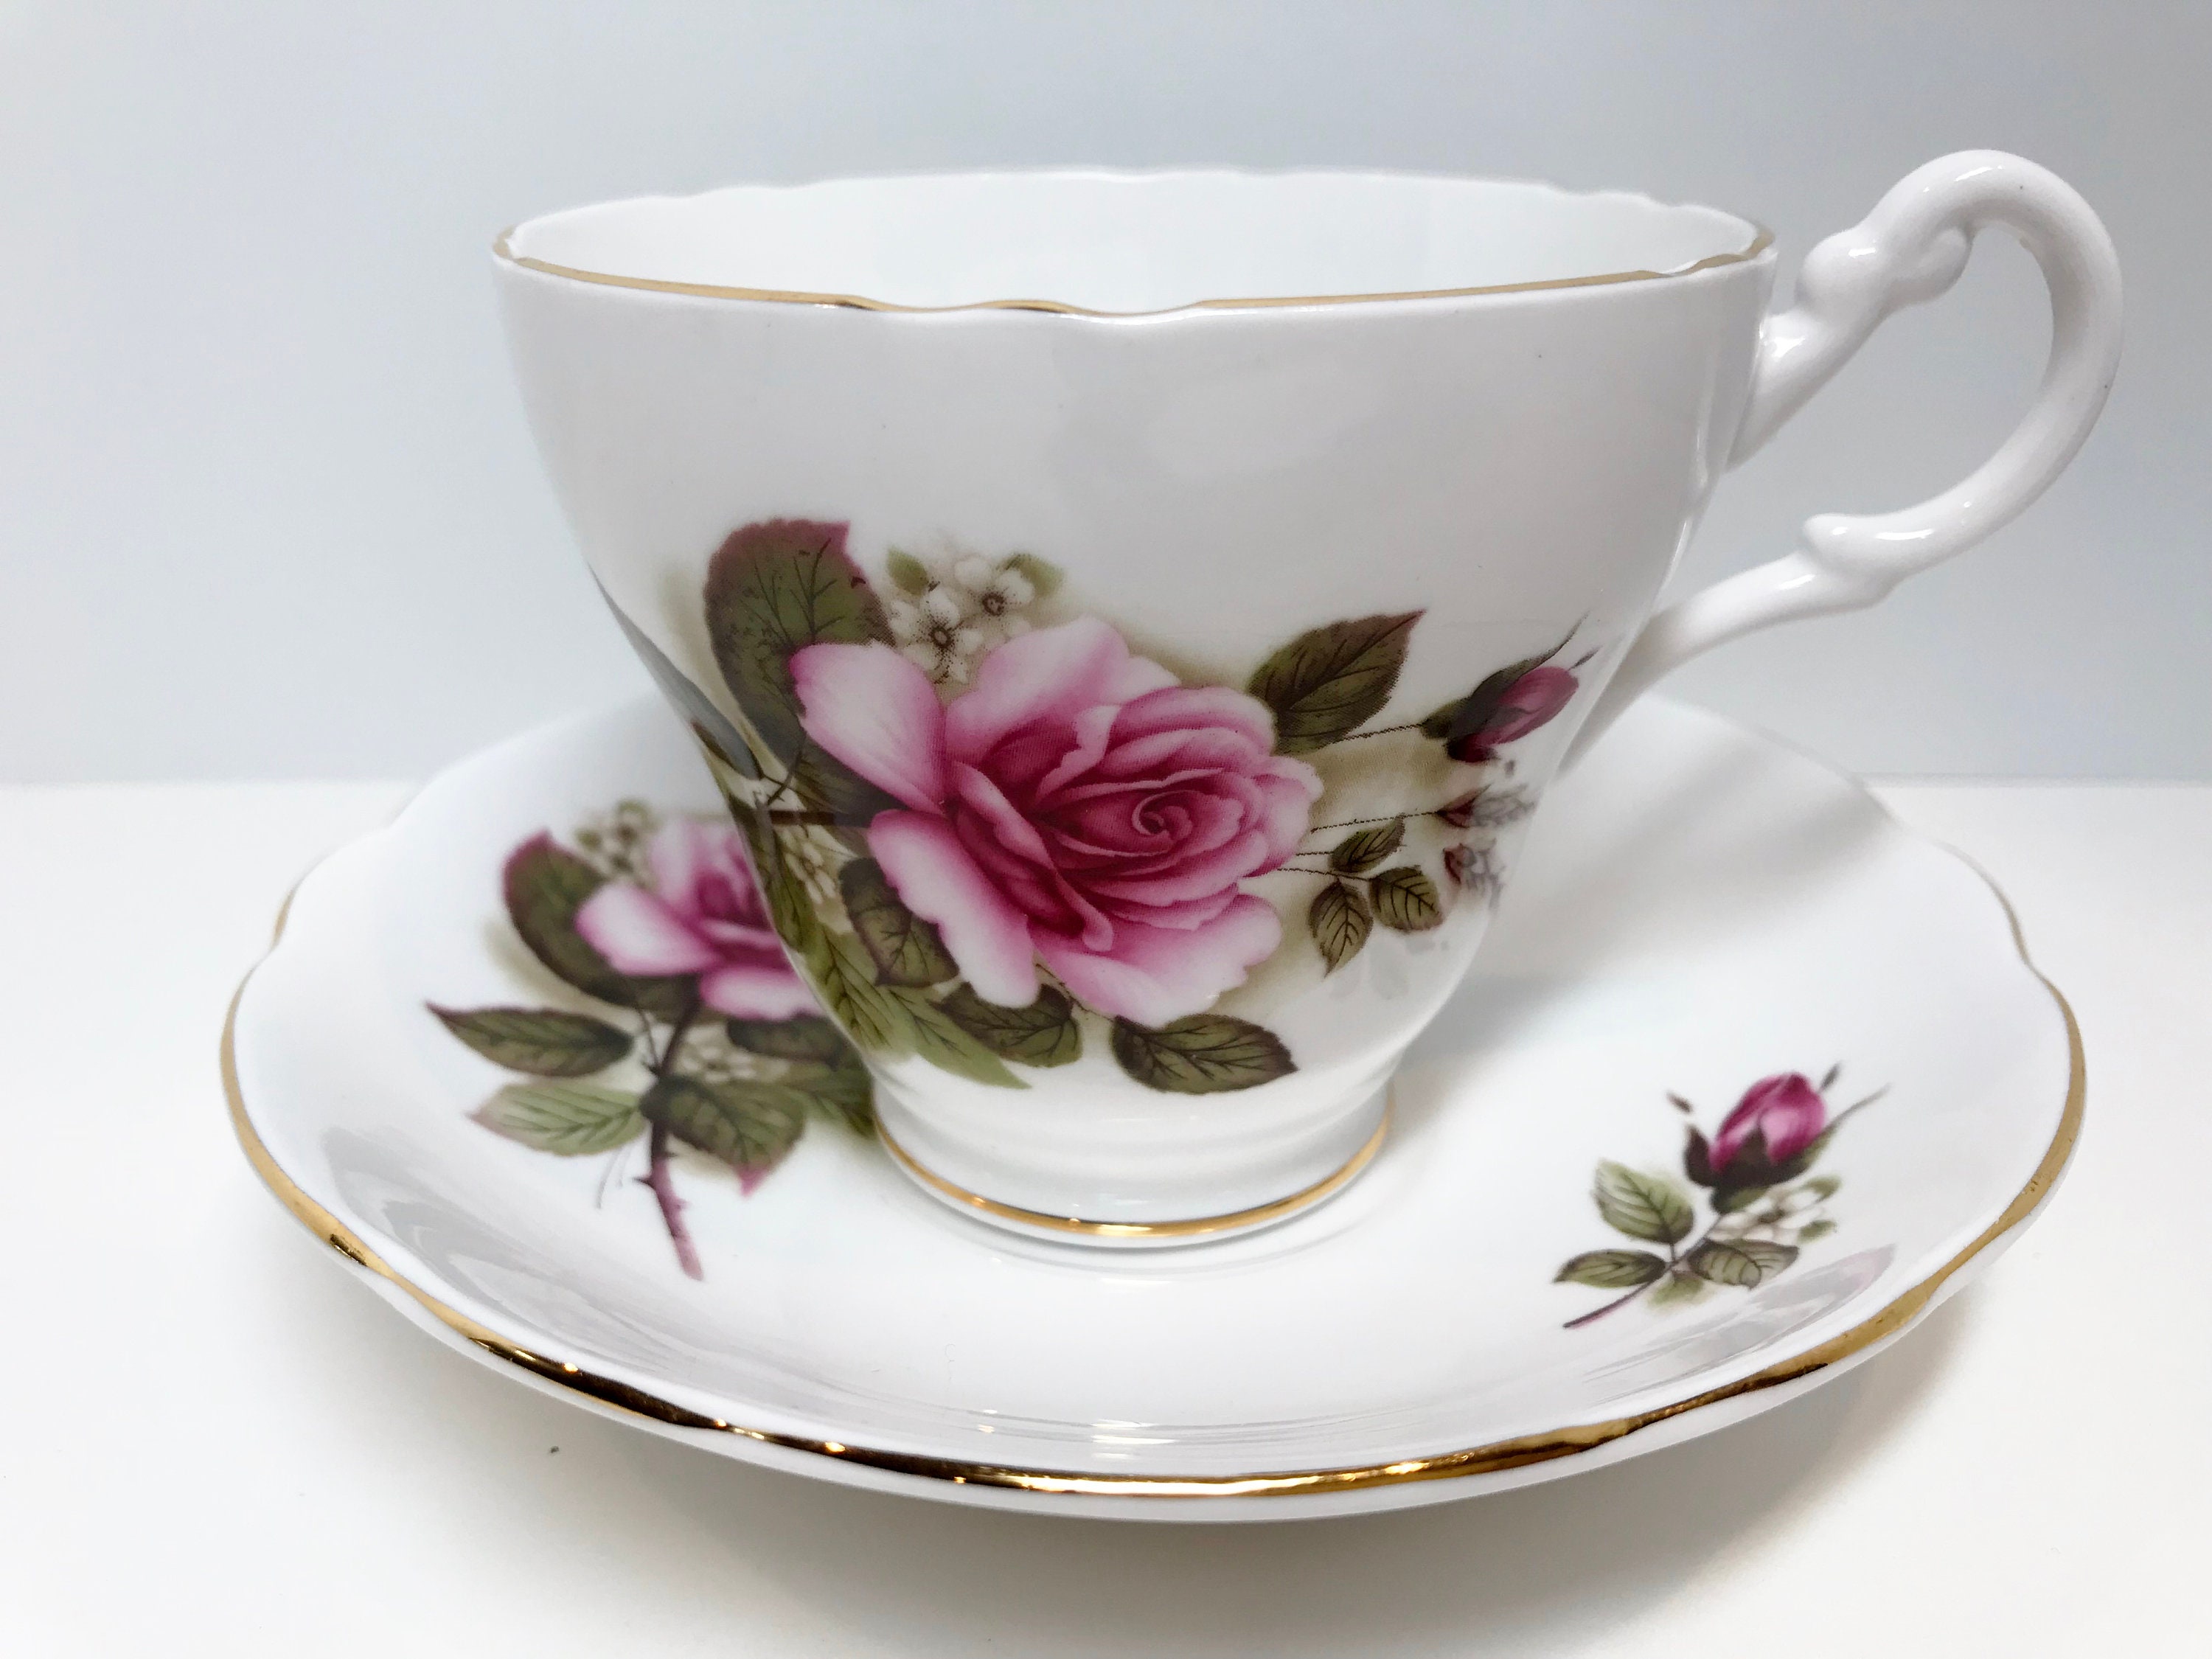 Royal Ascot Tea Cup And Saucer Pink Rose Cups English Bone China Vintage Tea Cups Antique 